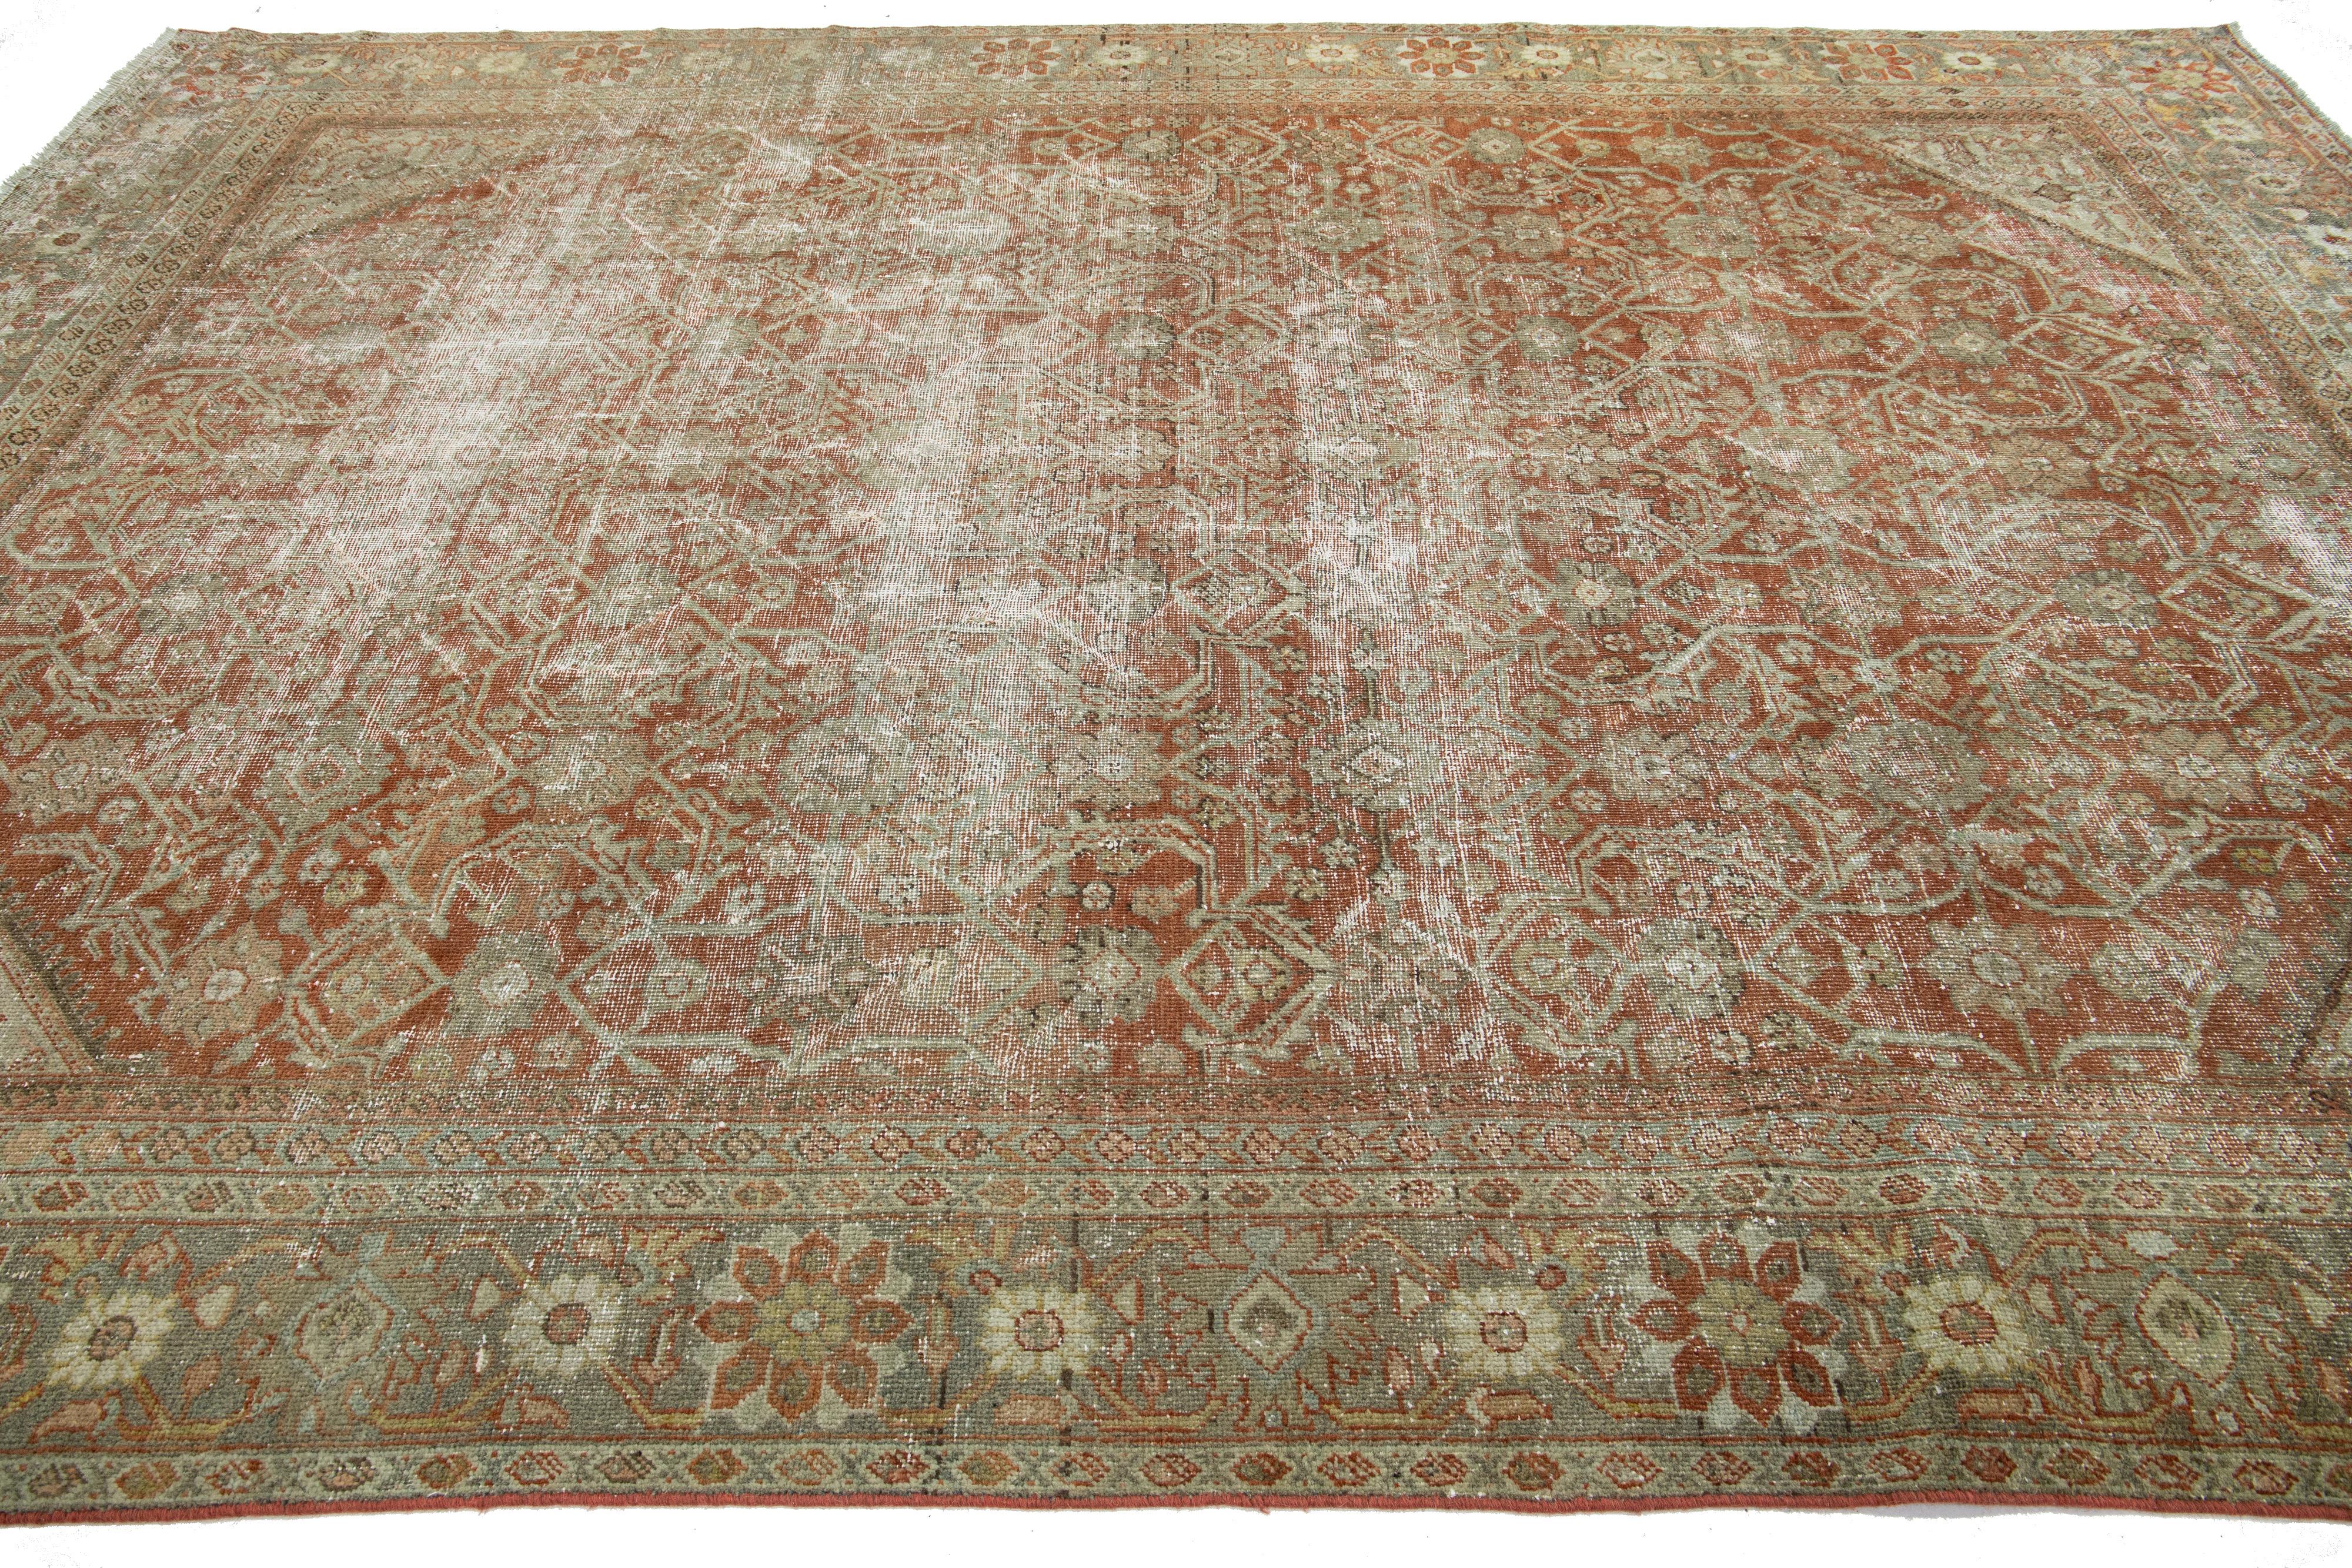 20th Century Handmade Antique Persian Mahal Wool Rug In Rust Color with Allover Design For Sale